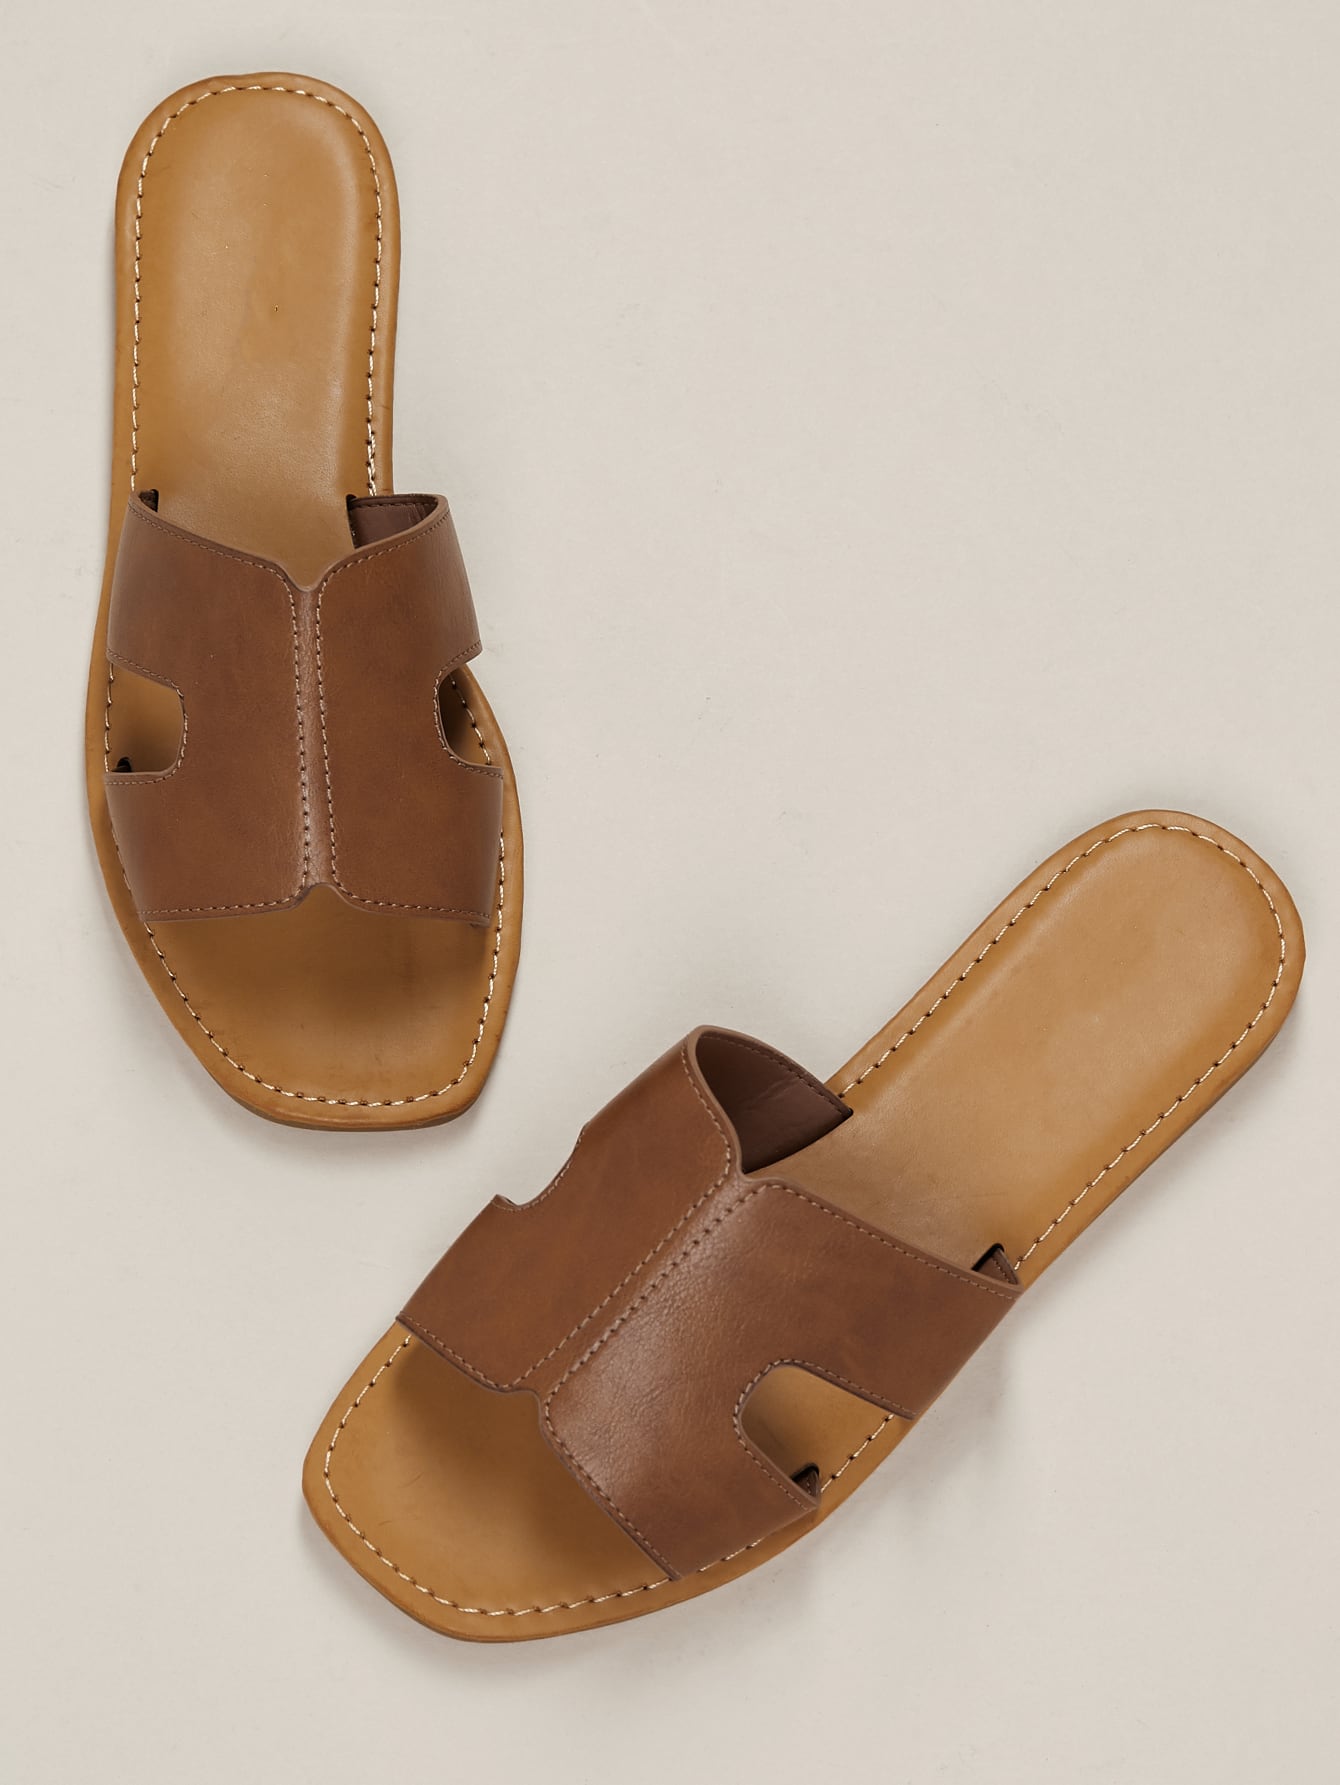 Wide Band Dual Cut Out Slide Sandals